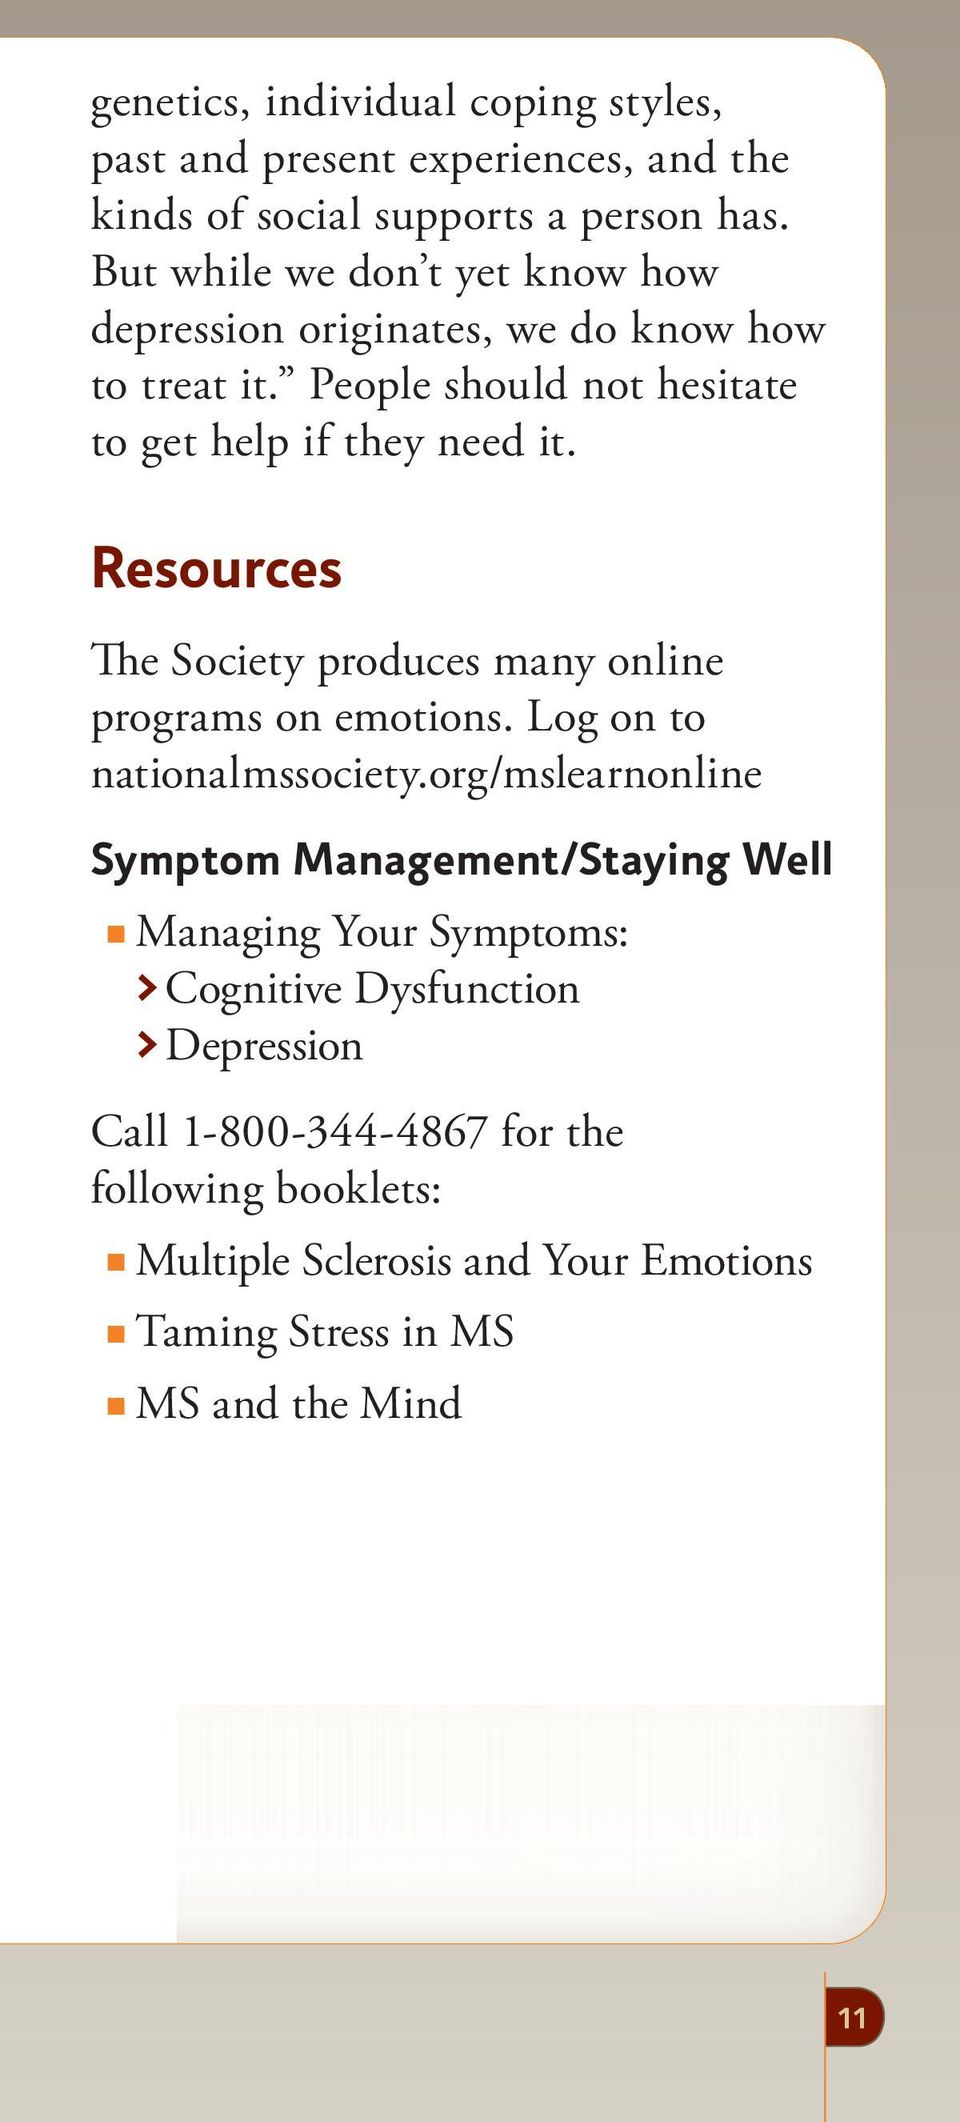 Resources The Society produces many online programs on emotions. Log on to nationalmssociety.